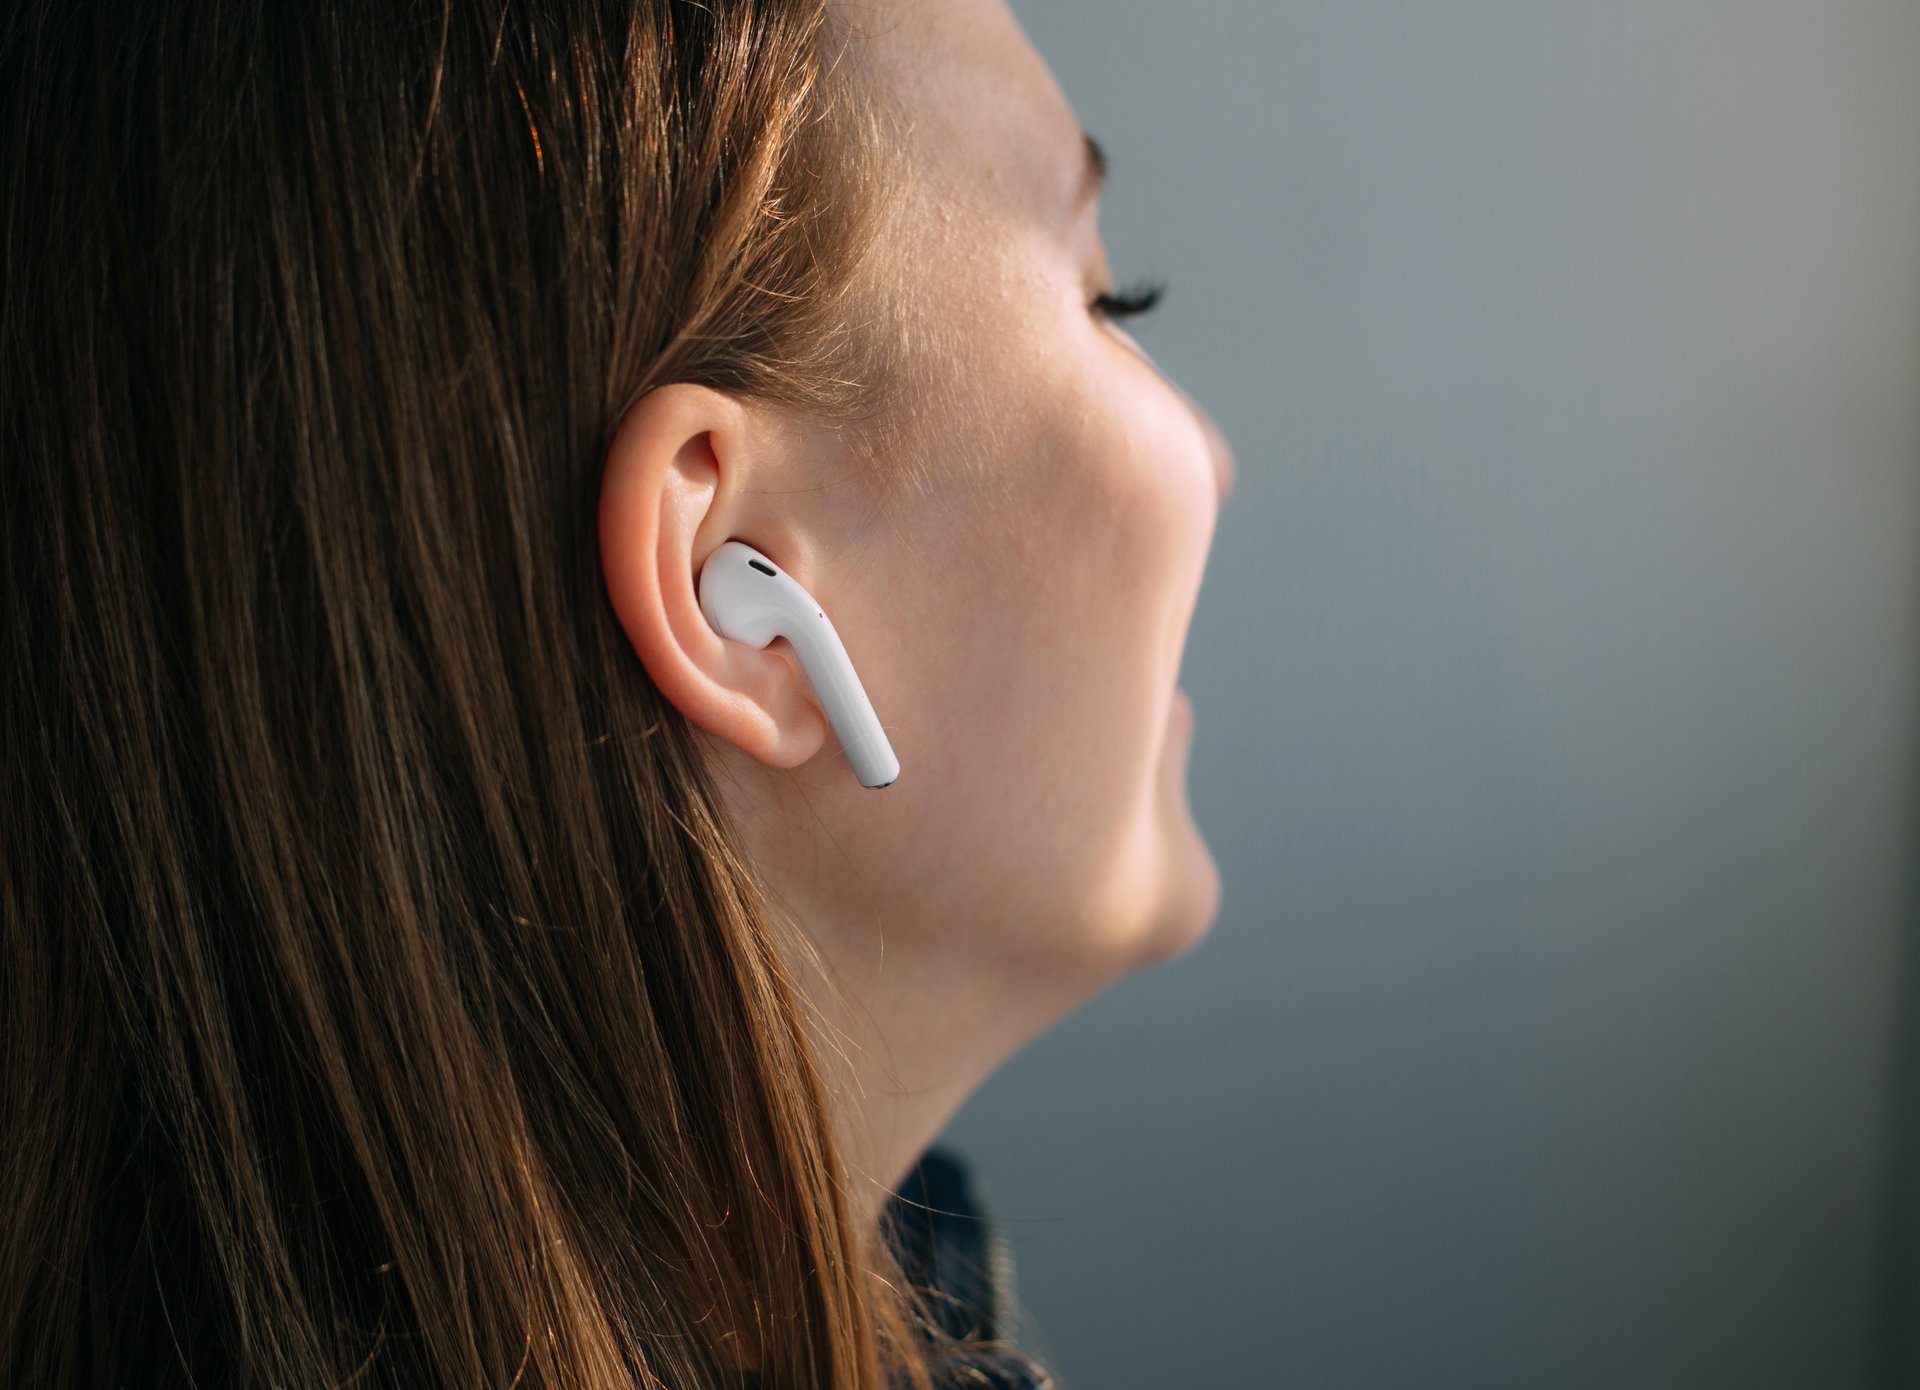 News Picture: Could Wireless Earbuds Help Boost Poor Hearing?